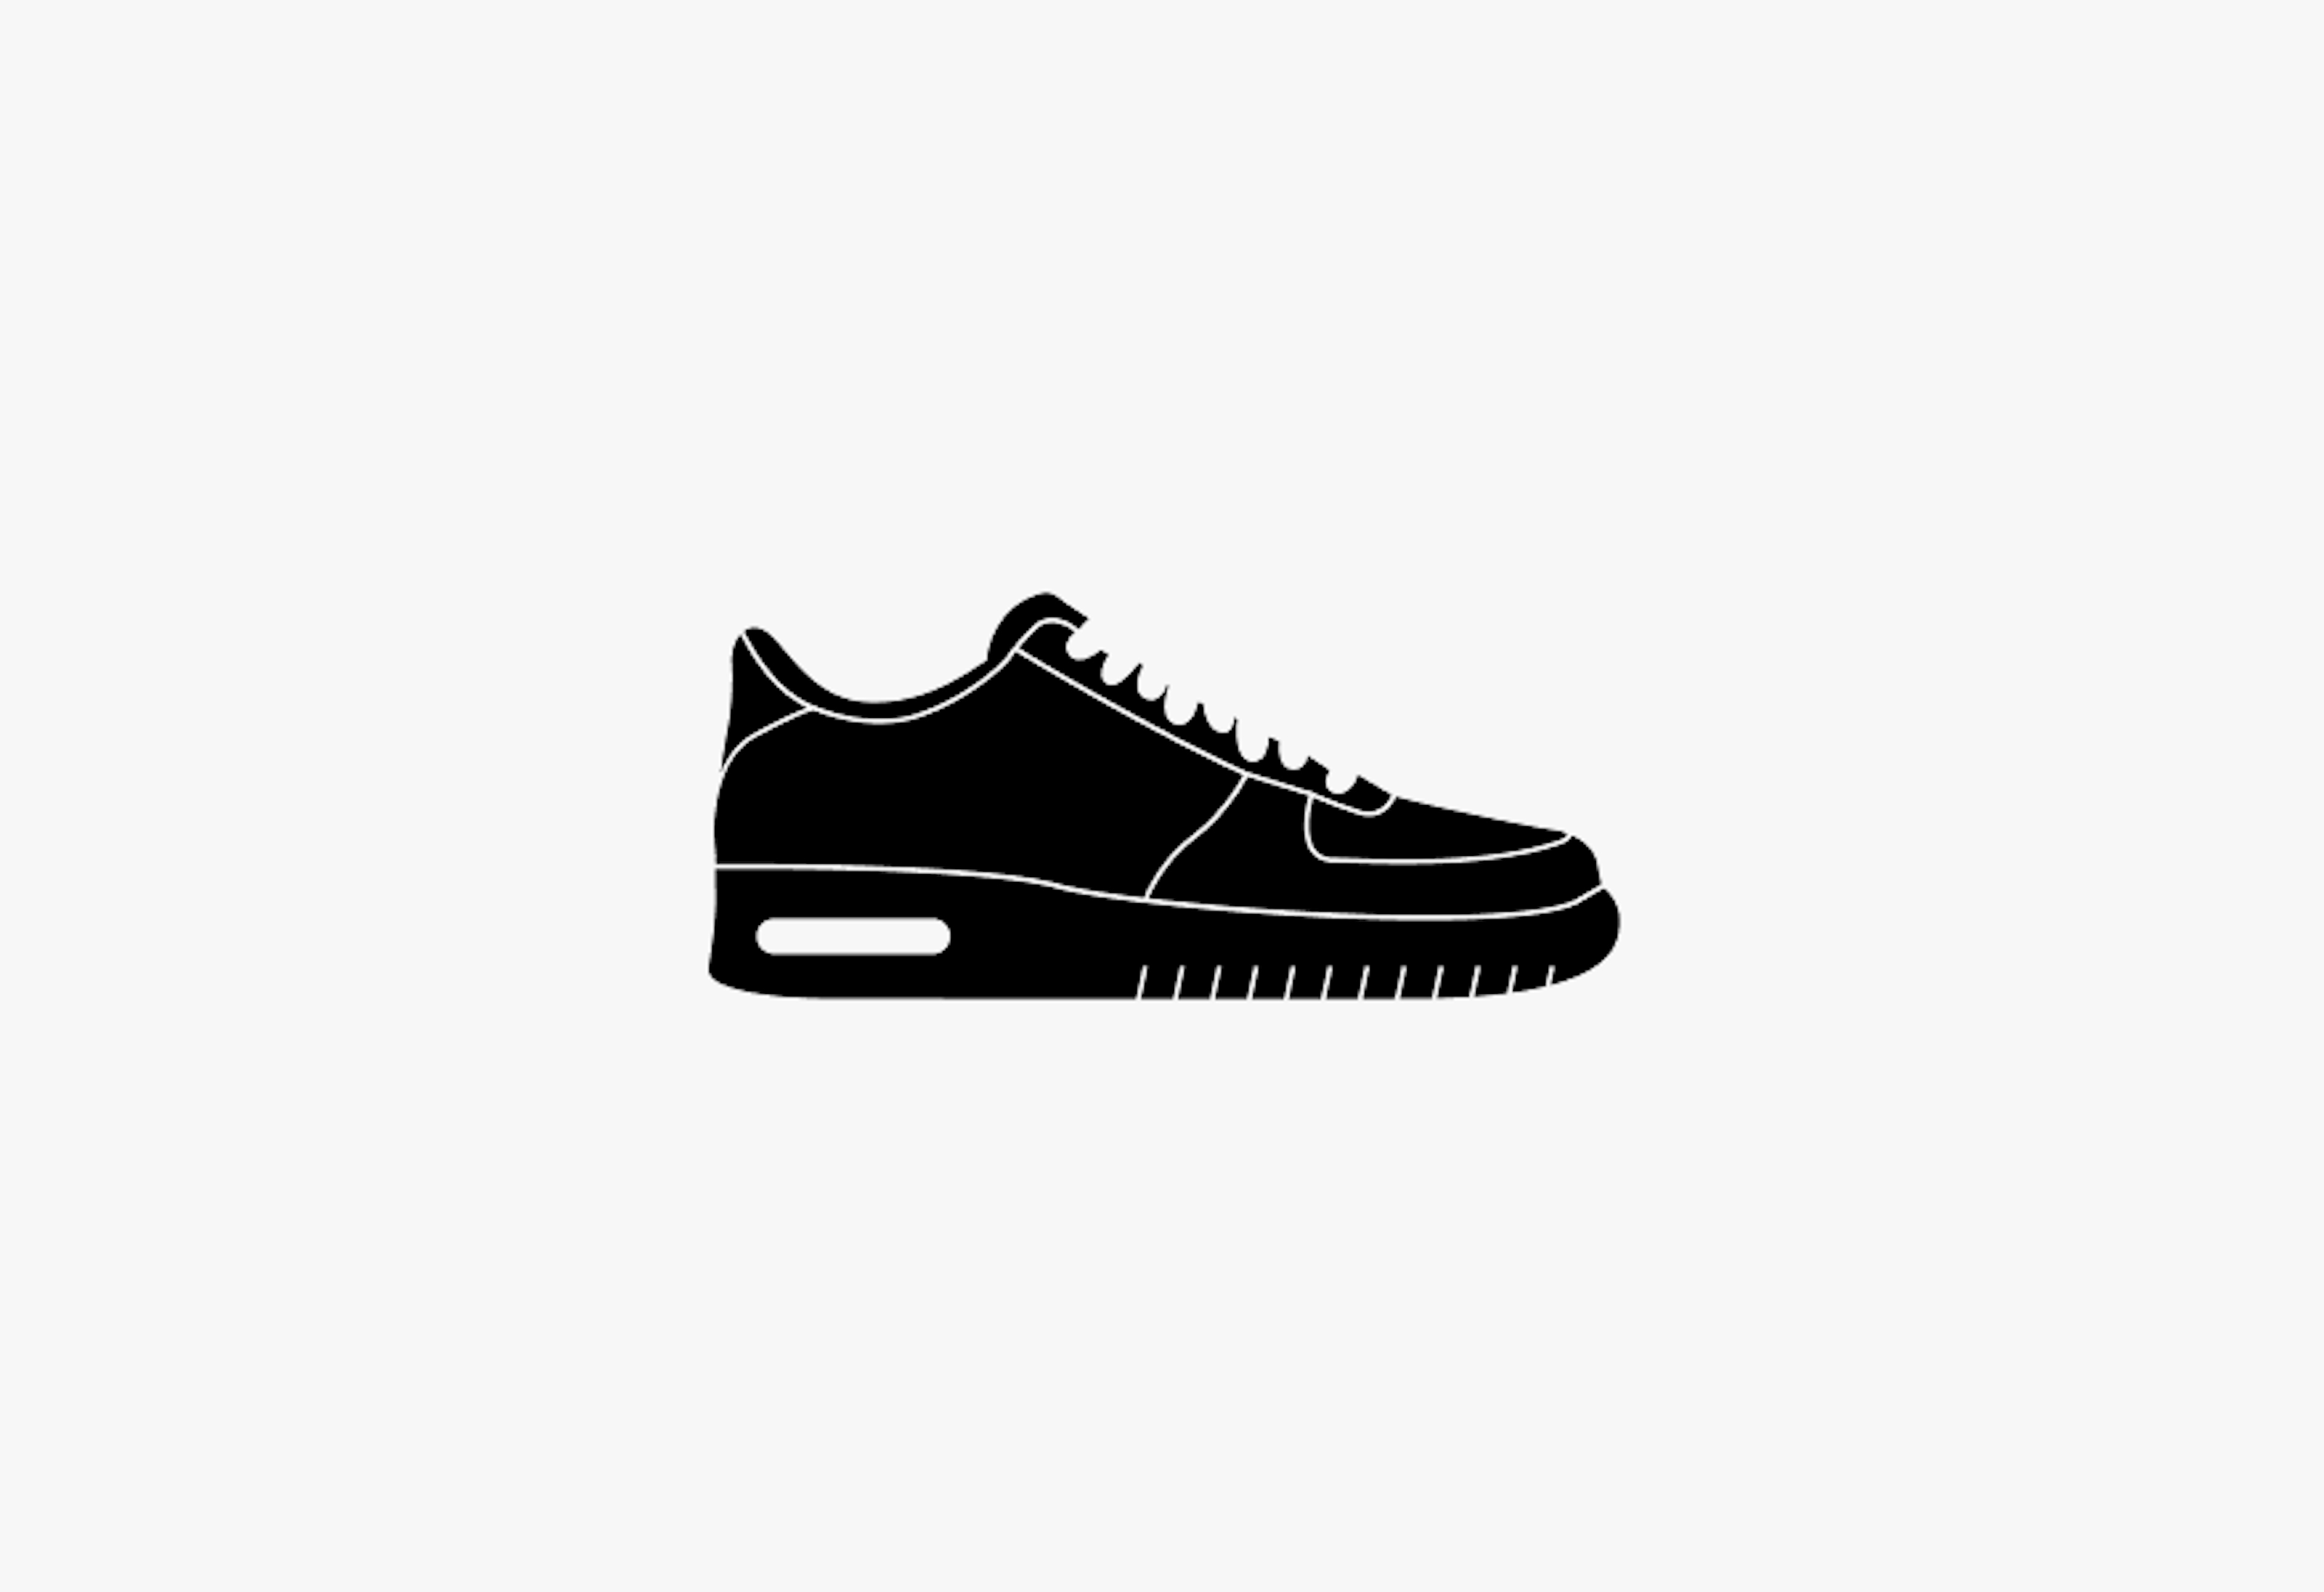 A filled shoe icon with lots of fine line work and detail.